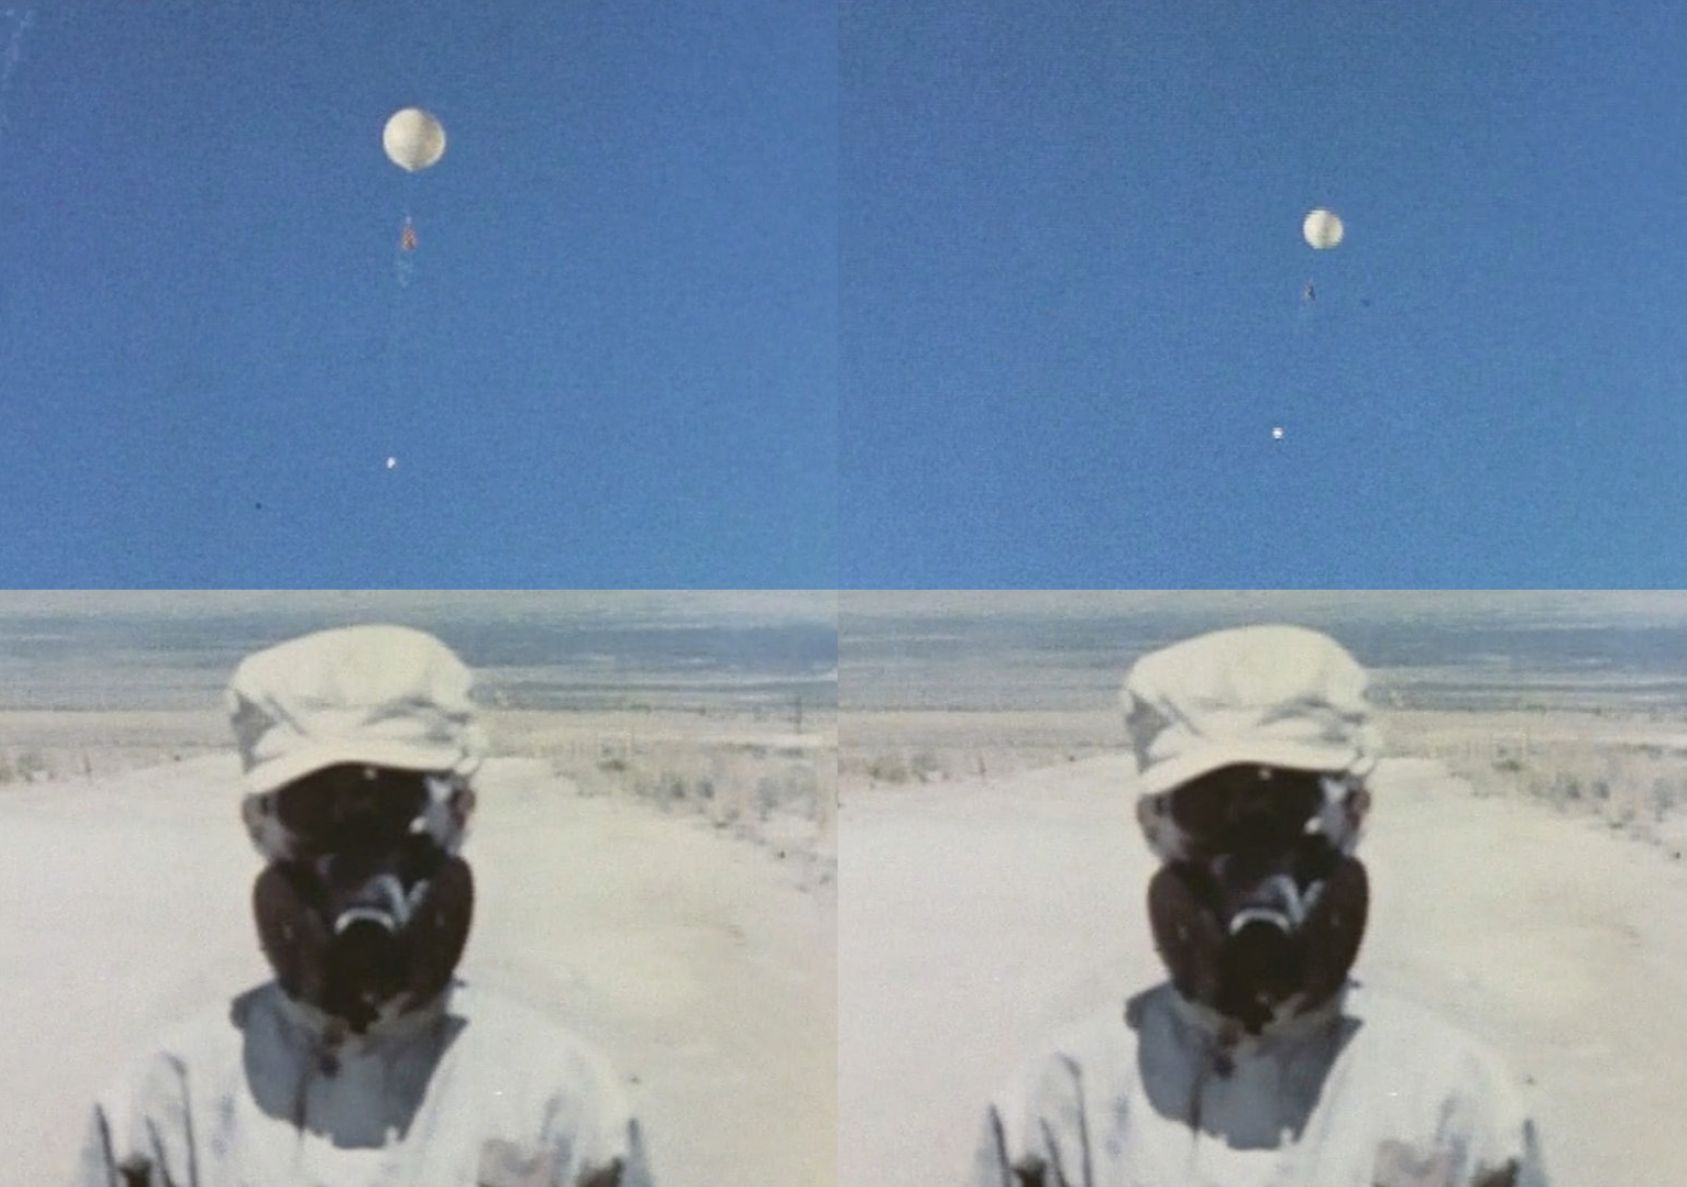 A screen shot of a film. A person in a white hazmat suit stands in a white, flat landscape. The blue sky takes up the upper half of the image, where a large weather balloon floats. 